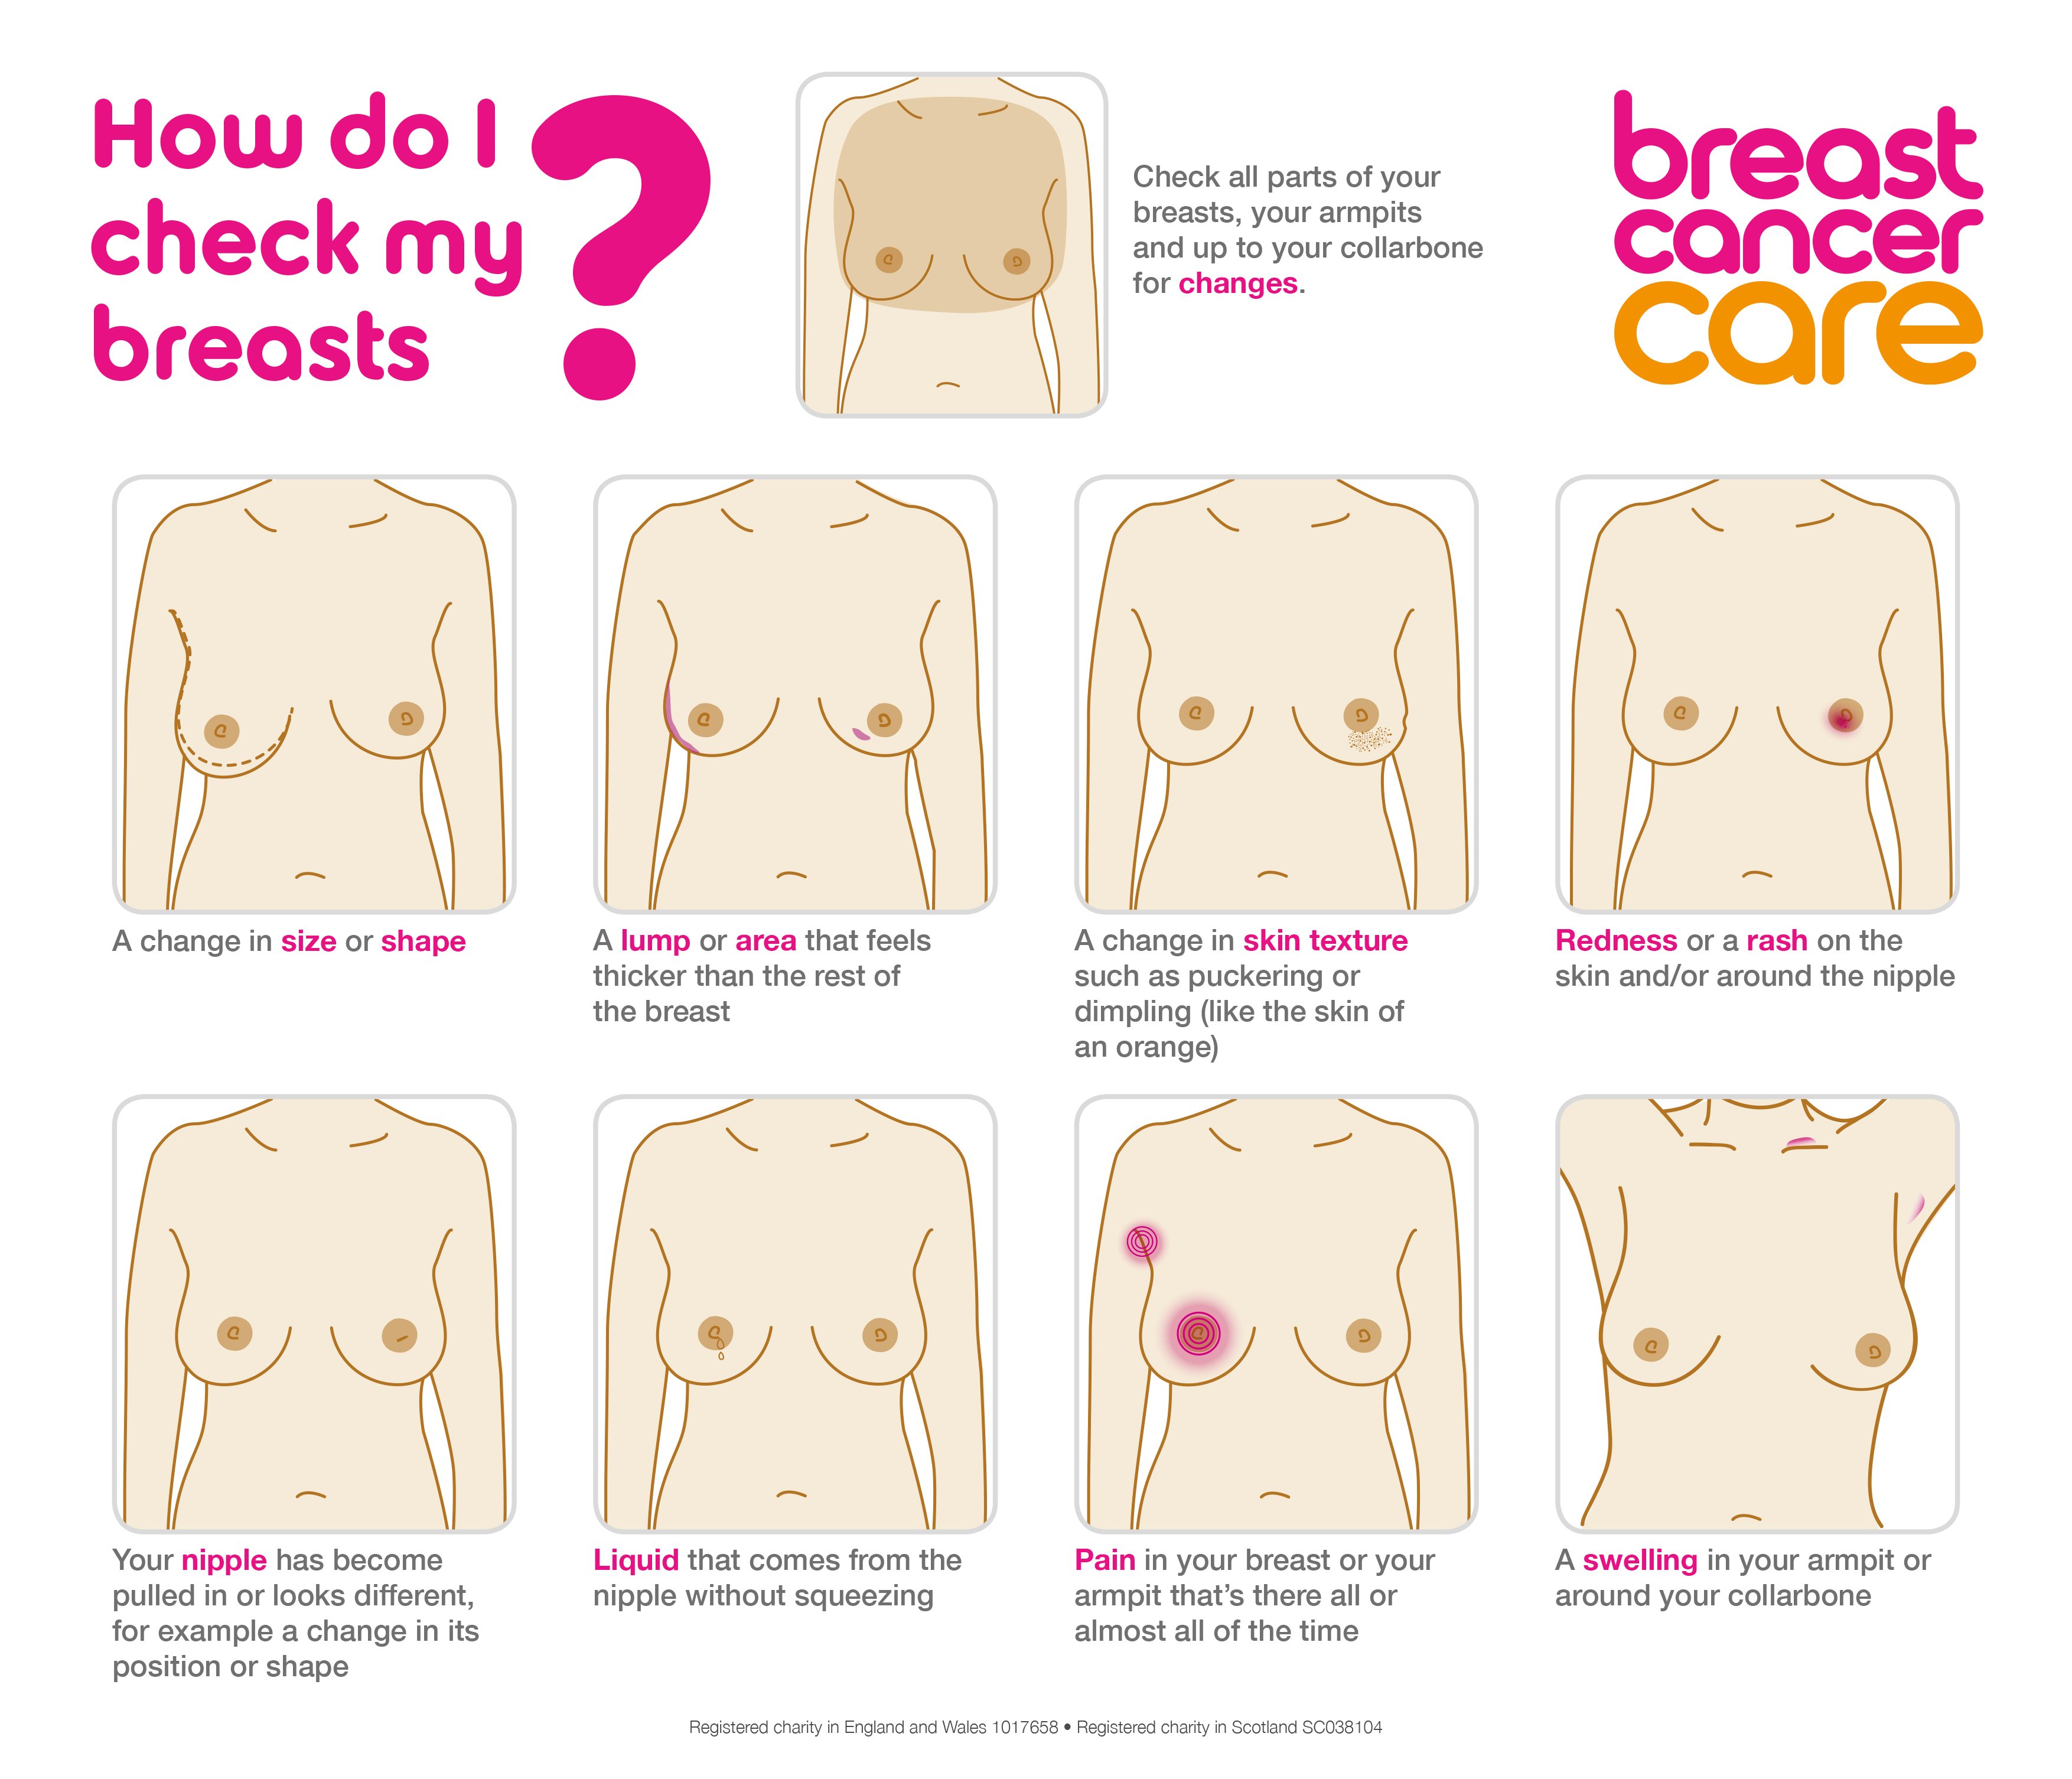 Breast Cancer Now on X: Would you notice a change in your breasts